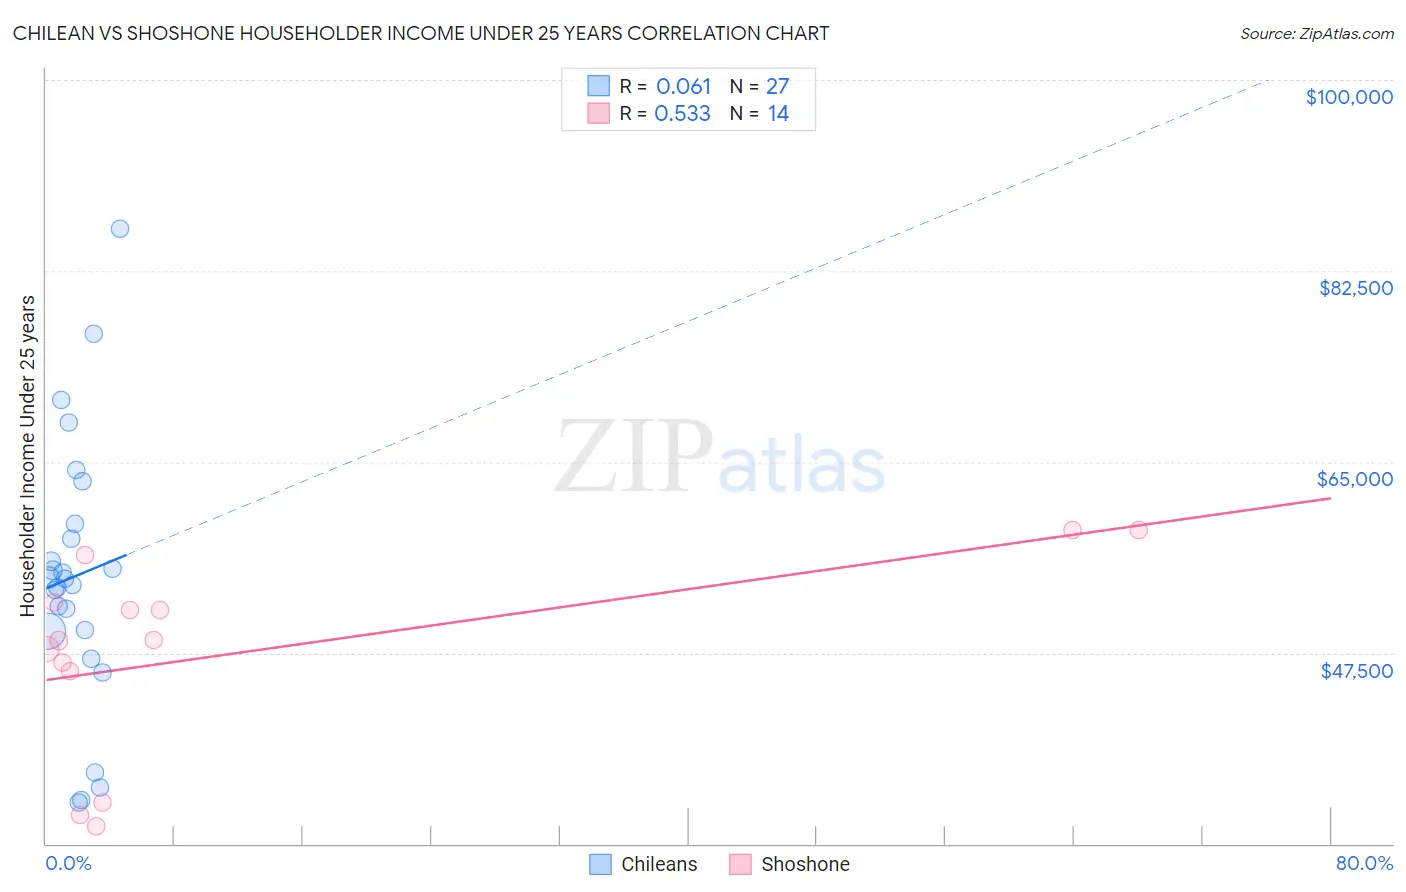 Chilean vs Shoshone Householder Income Under 25 years